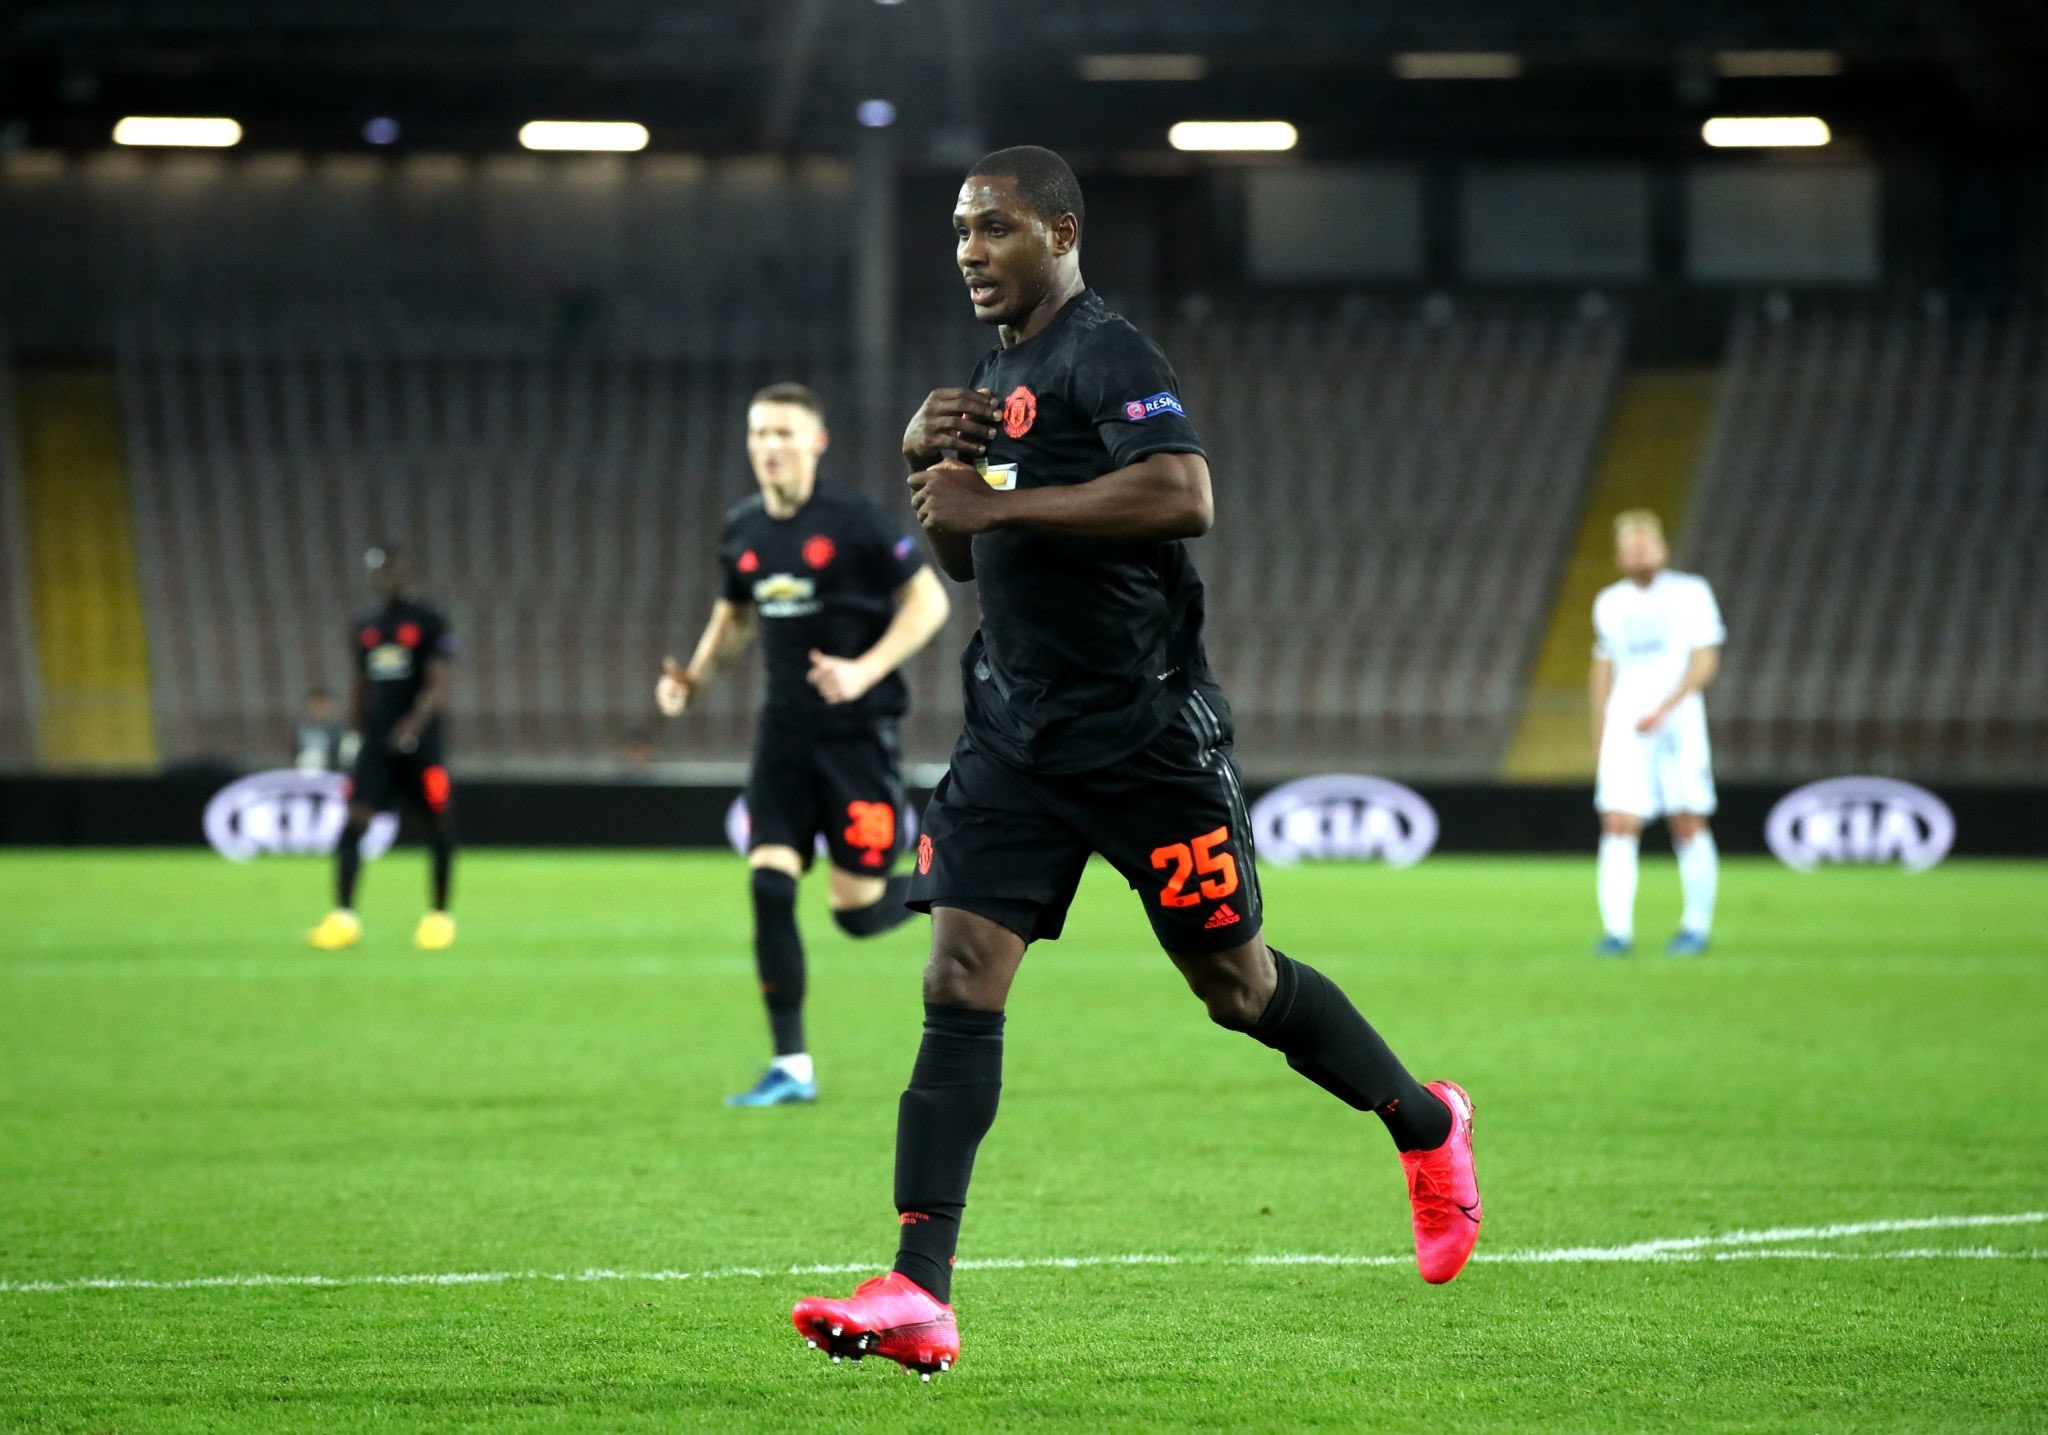 Man United Vs Chelsea: Ighalo Targets 6th FA Cup Goal In 10 Games